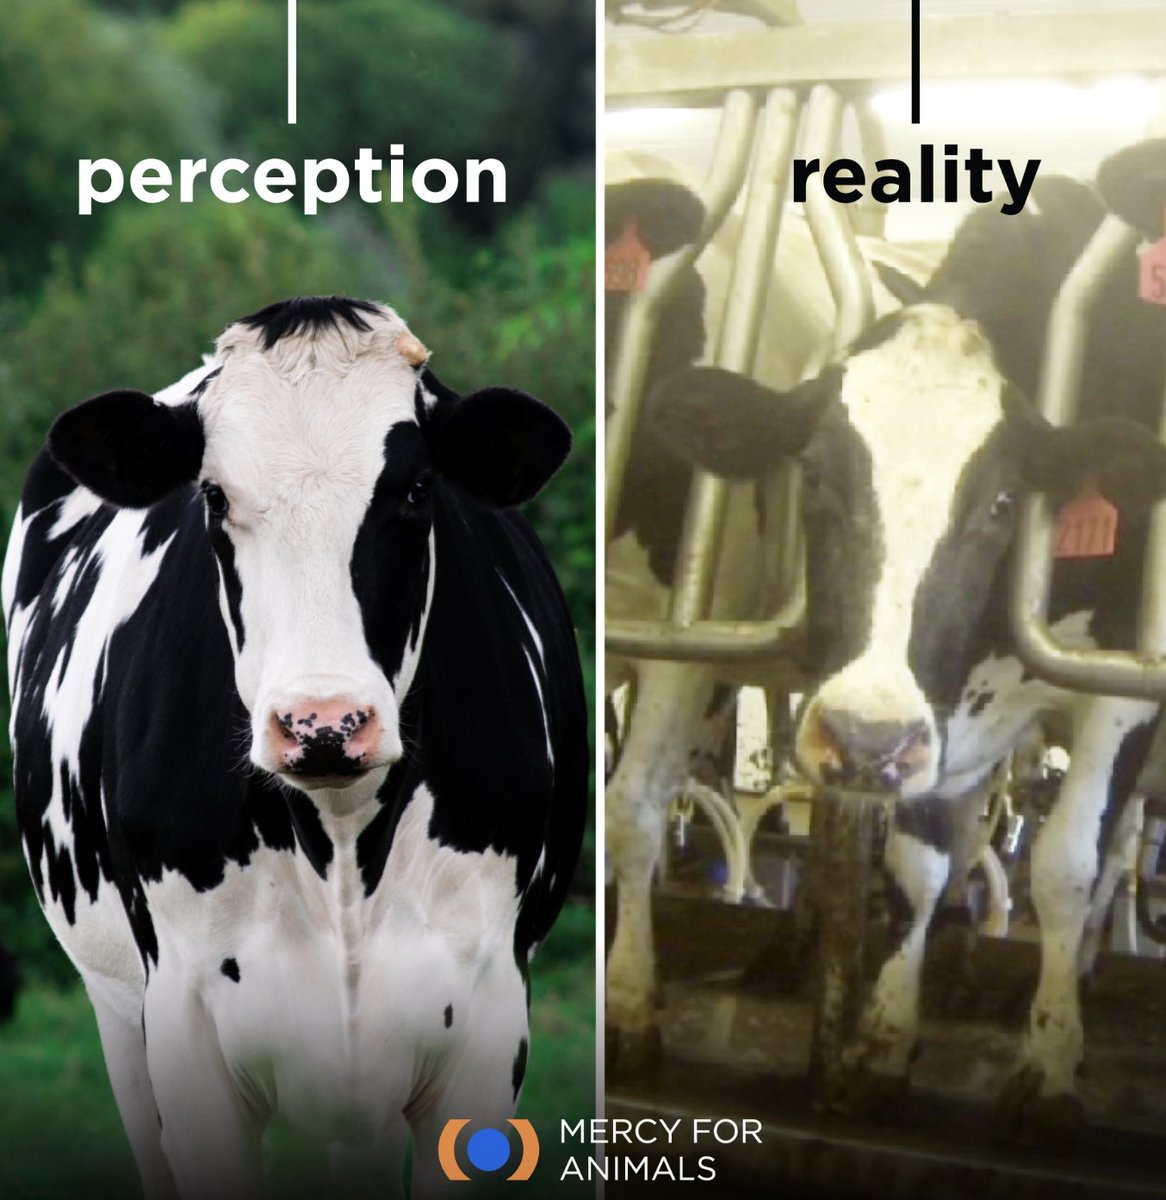 Don't be fooled by the marketing tactics! Learn the truth about the dairy industry: mercyforanimals.org/investigations/